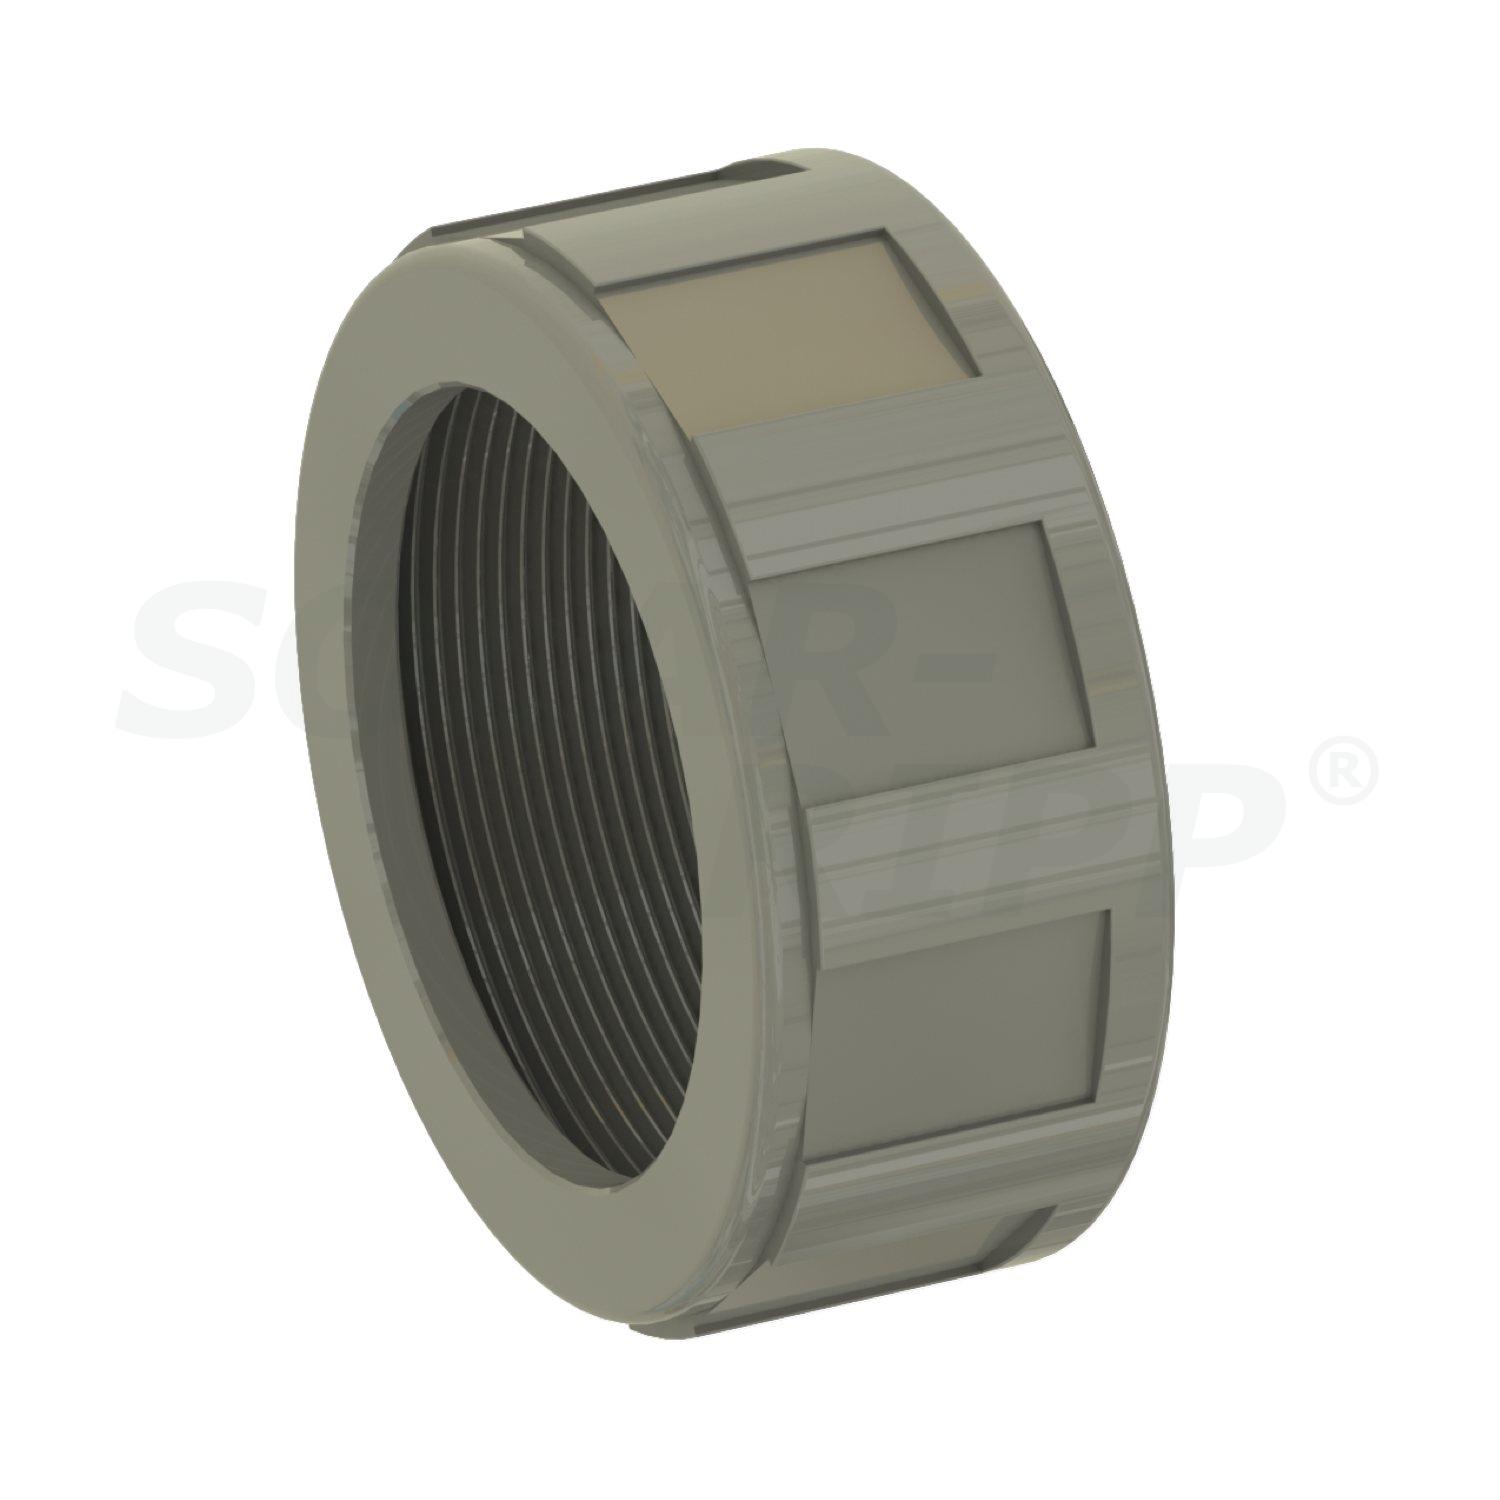 Ring nut for actuated 3 way valve 50mm